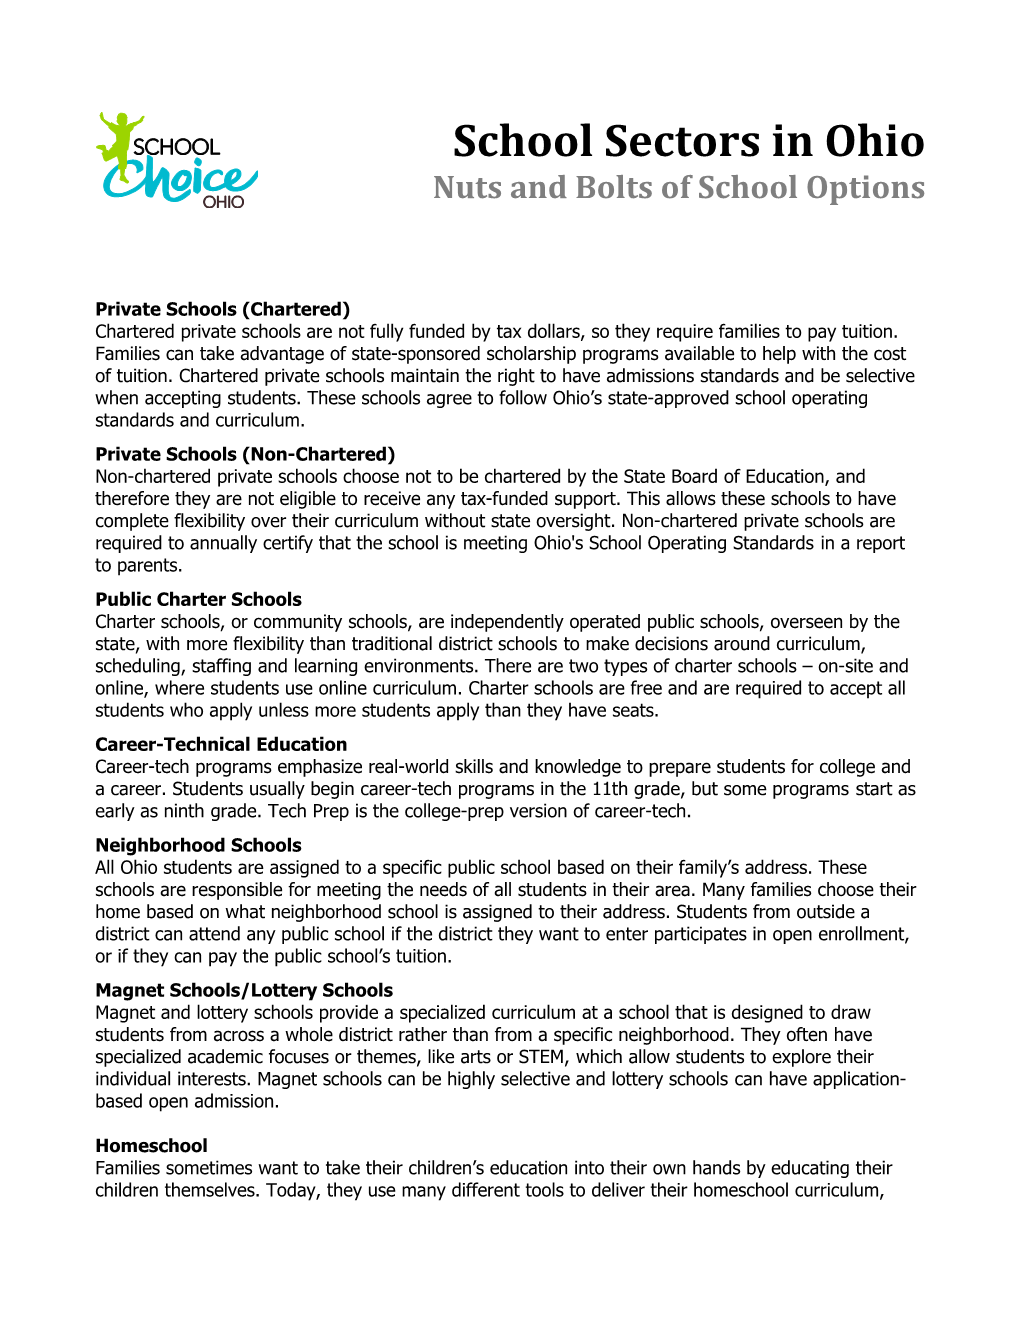 School Sectors in Ohionuts and Bolts of School Options